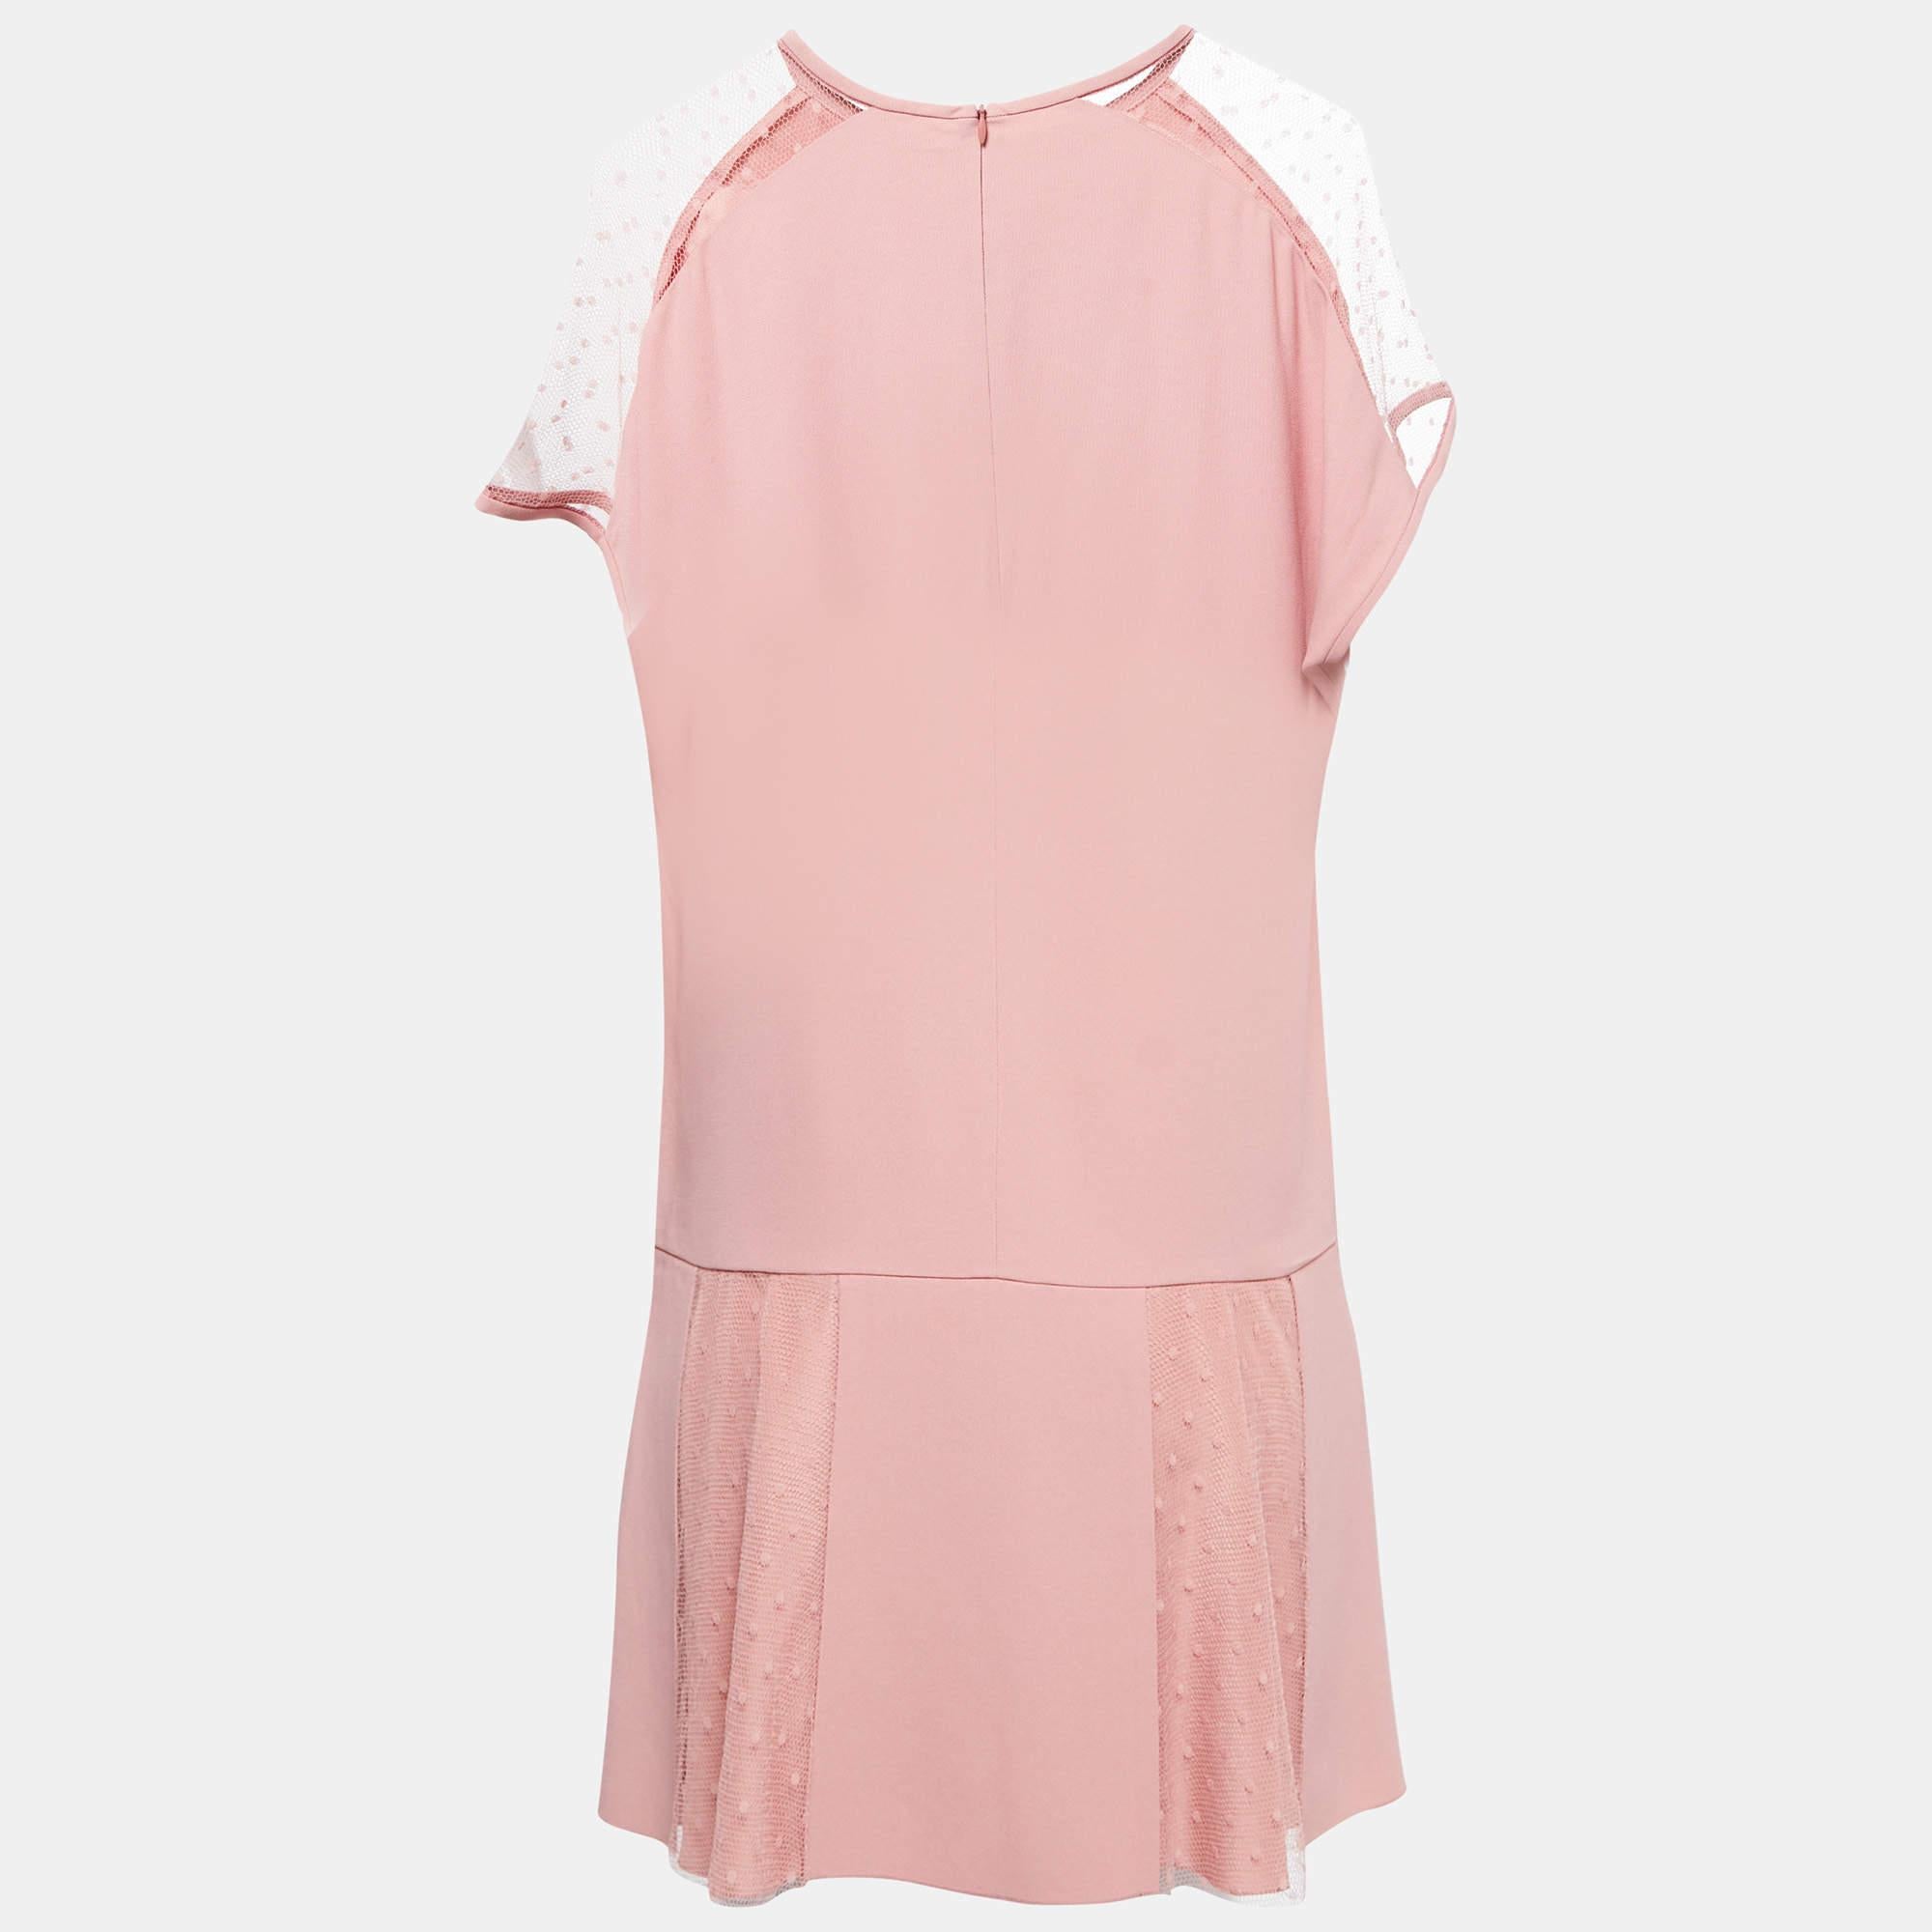 Refresh your summer wardrobe by adding this beautiful dress from RED Valentino. Creatively made and featuring a poised style, this dress will make you look absolutely elegant.

Includes: Brand Tag